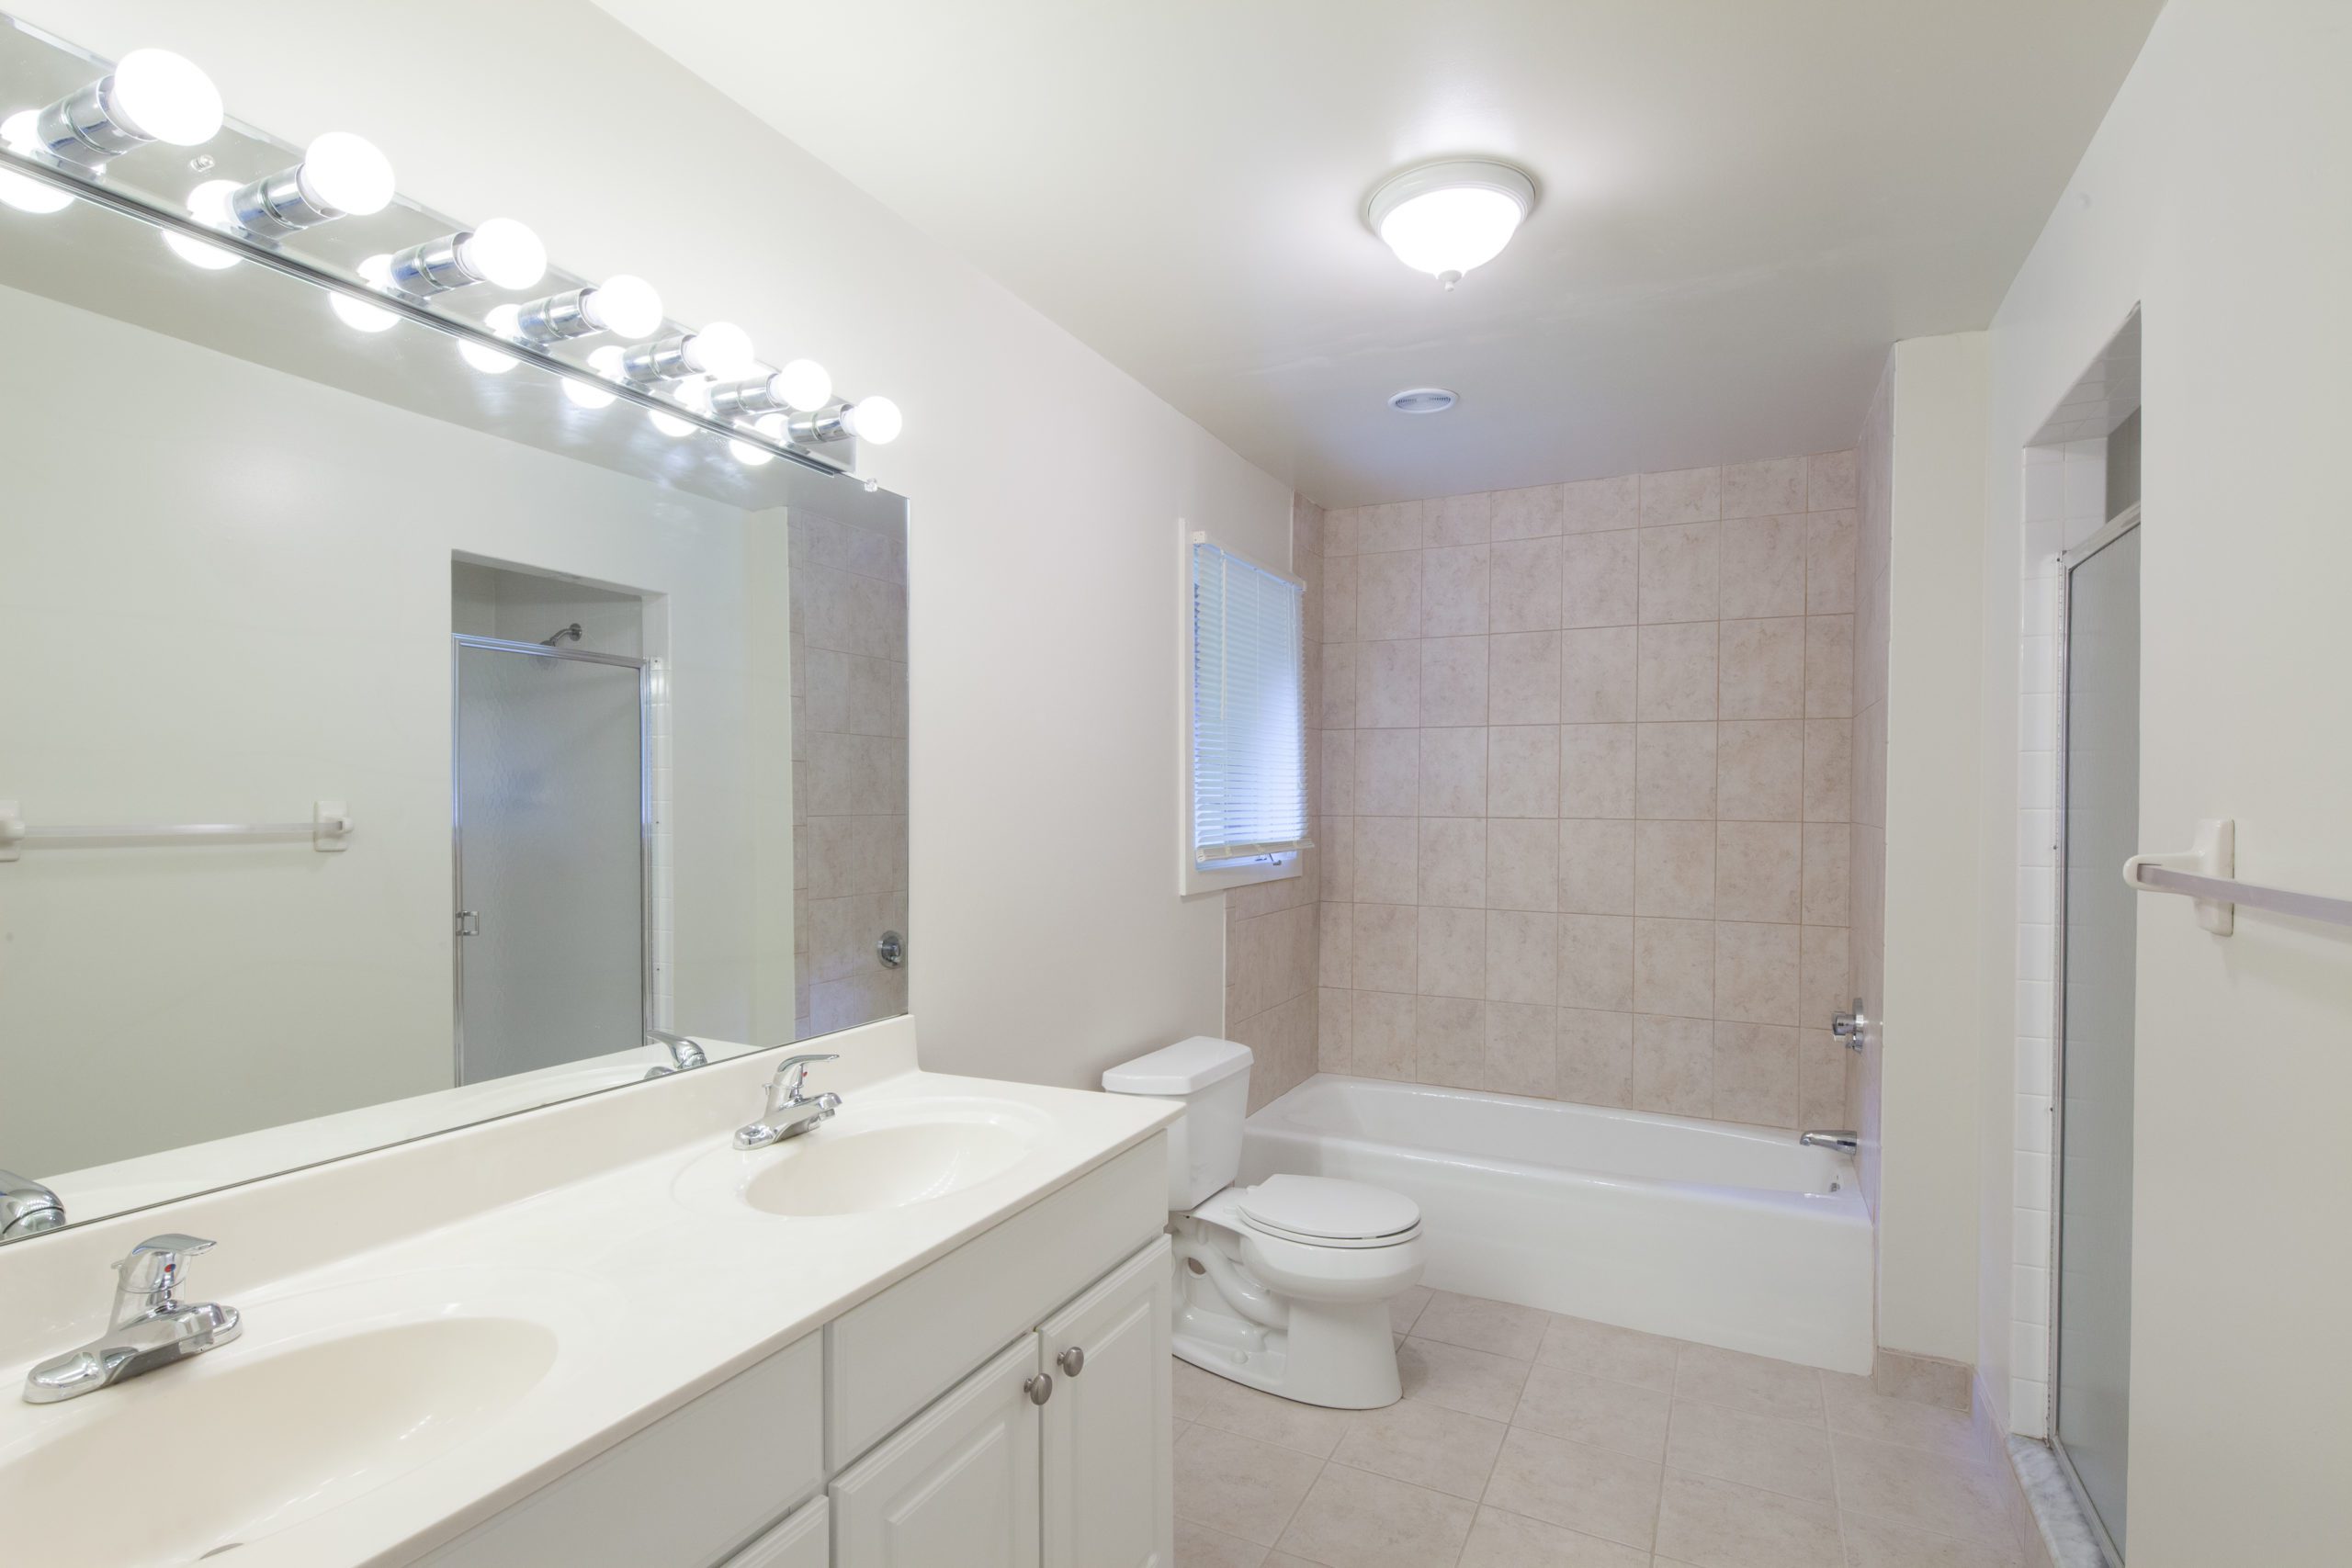 203 Living - Montoya apartment bathroom with dual sink and large mirror in Brandord, CT